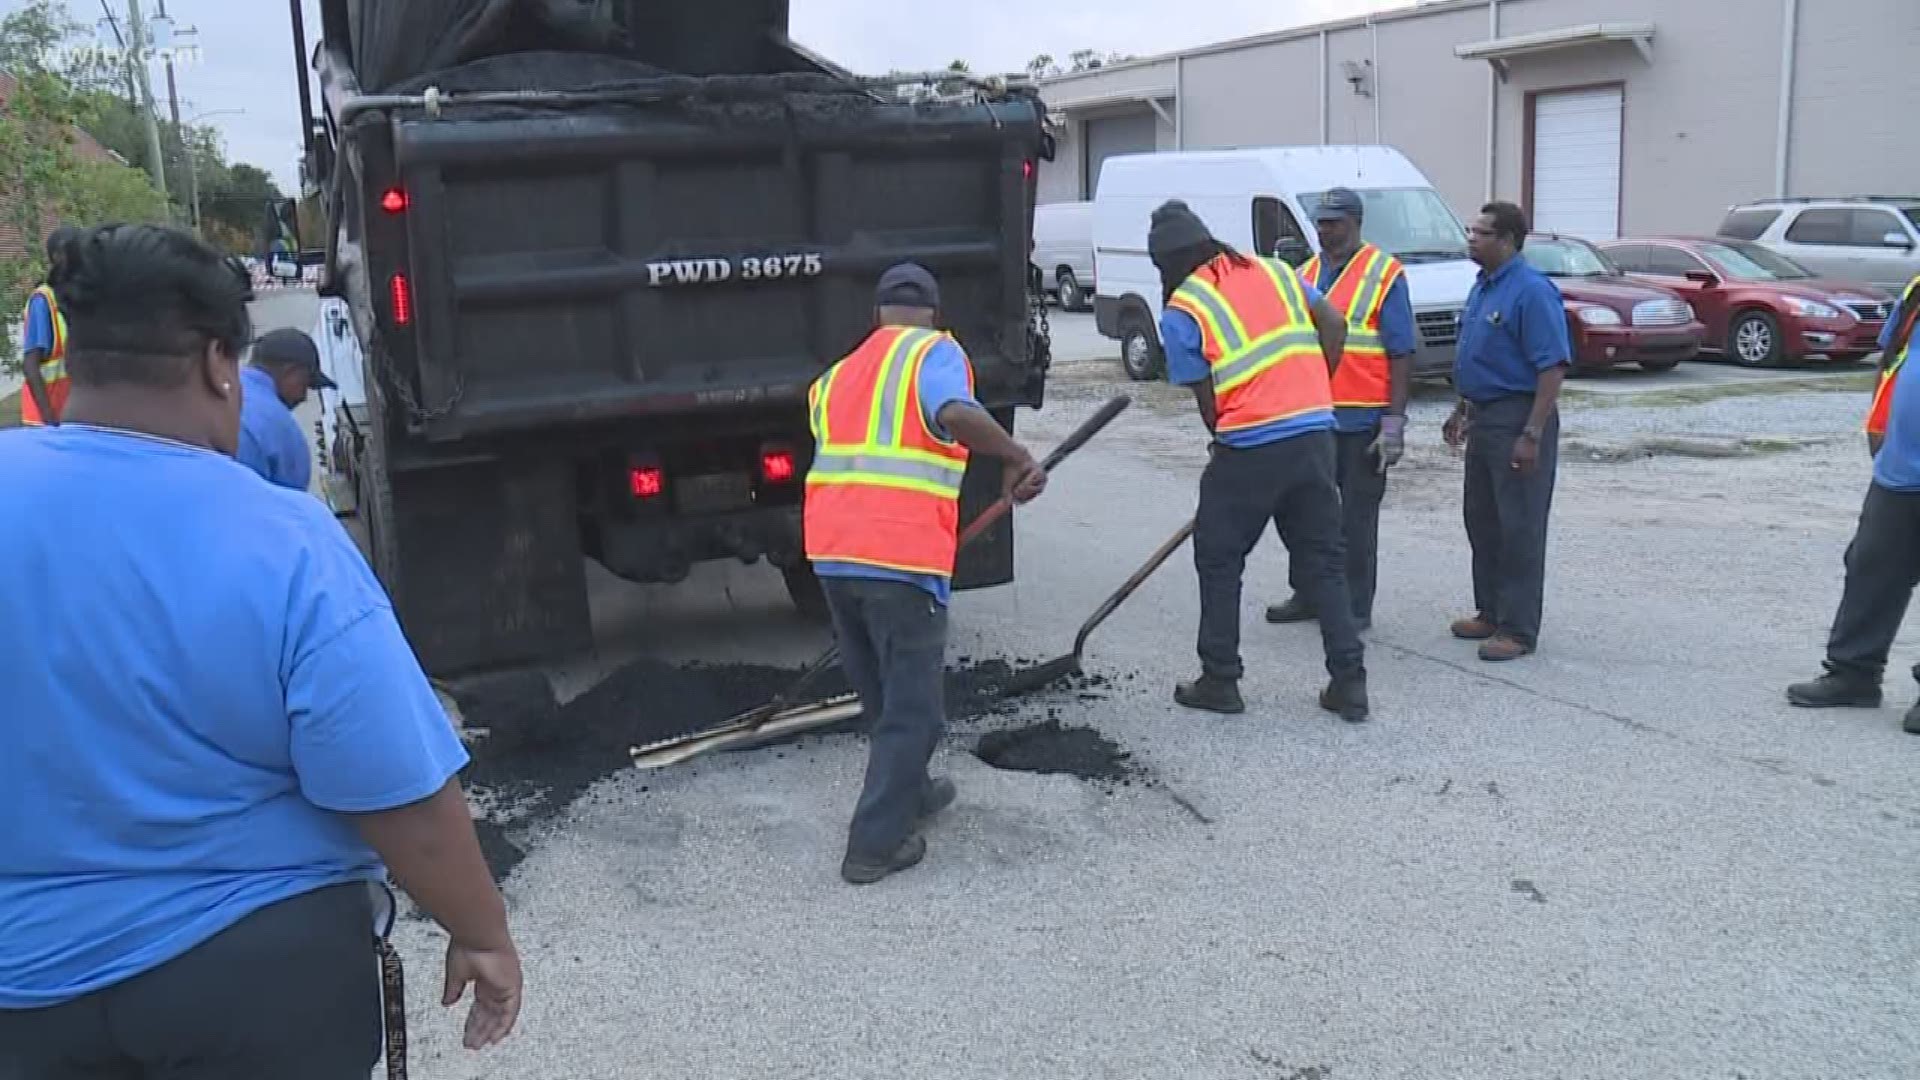 Dominos has given the city of New Orleans $5,000 to fill potholes. That won't pave a lot of streets, but Mayor LaToya Cantrell says it will help the city's infrastructure, which she says is a top priority of her administration.